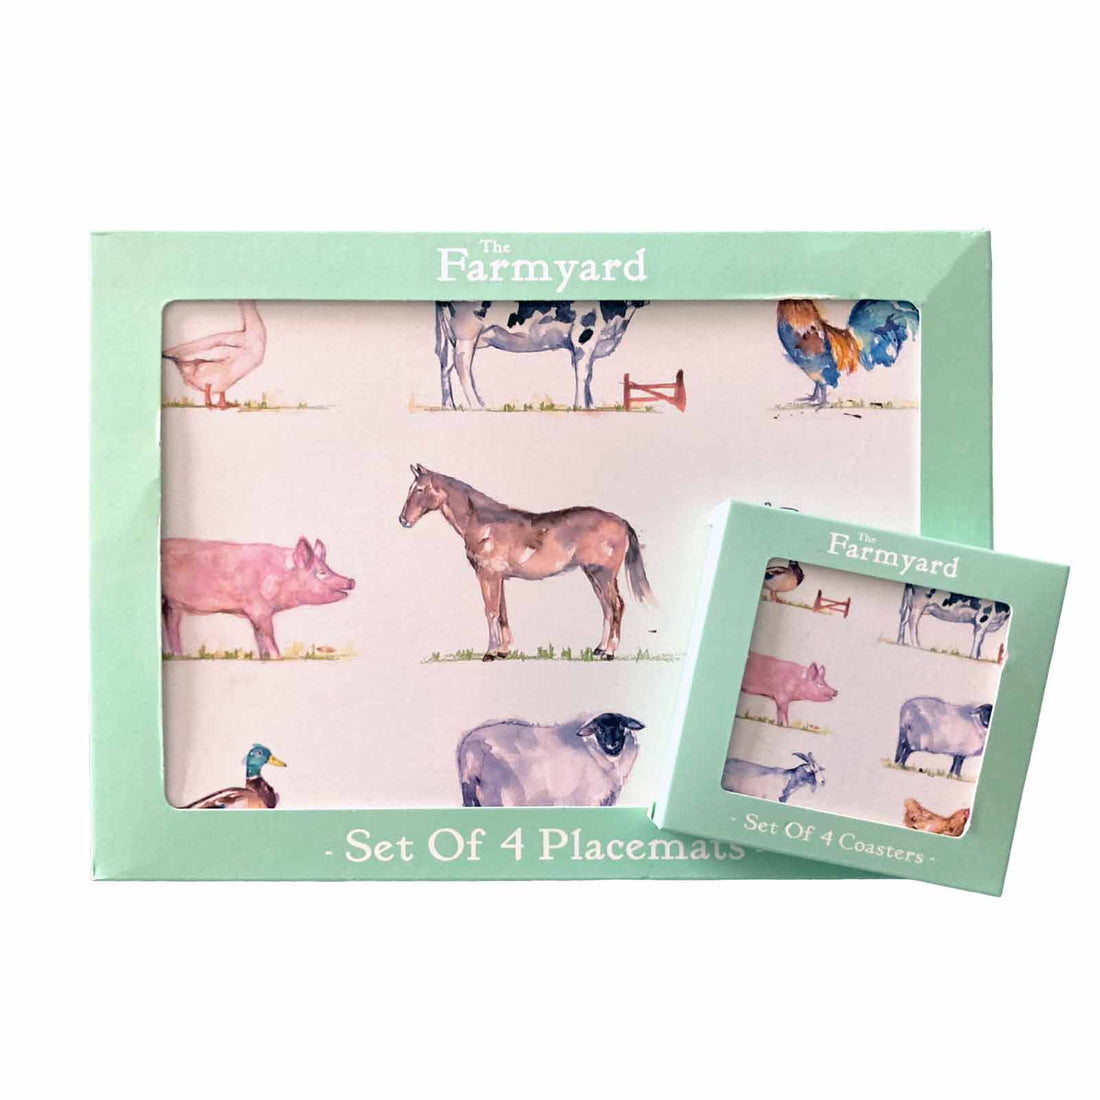 The Farmyard Placemats and Coasters Set of 4